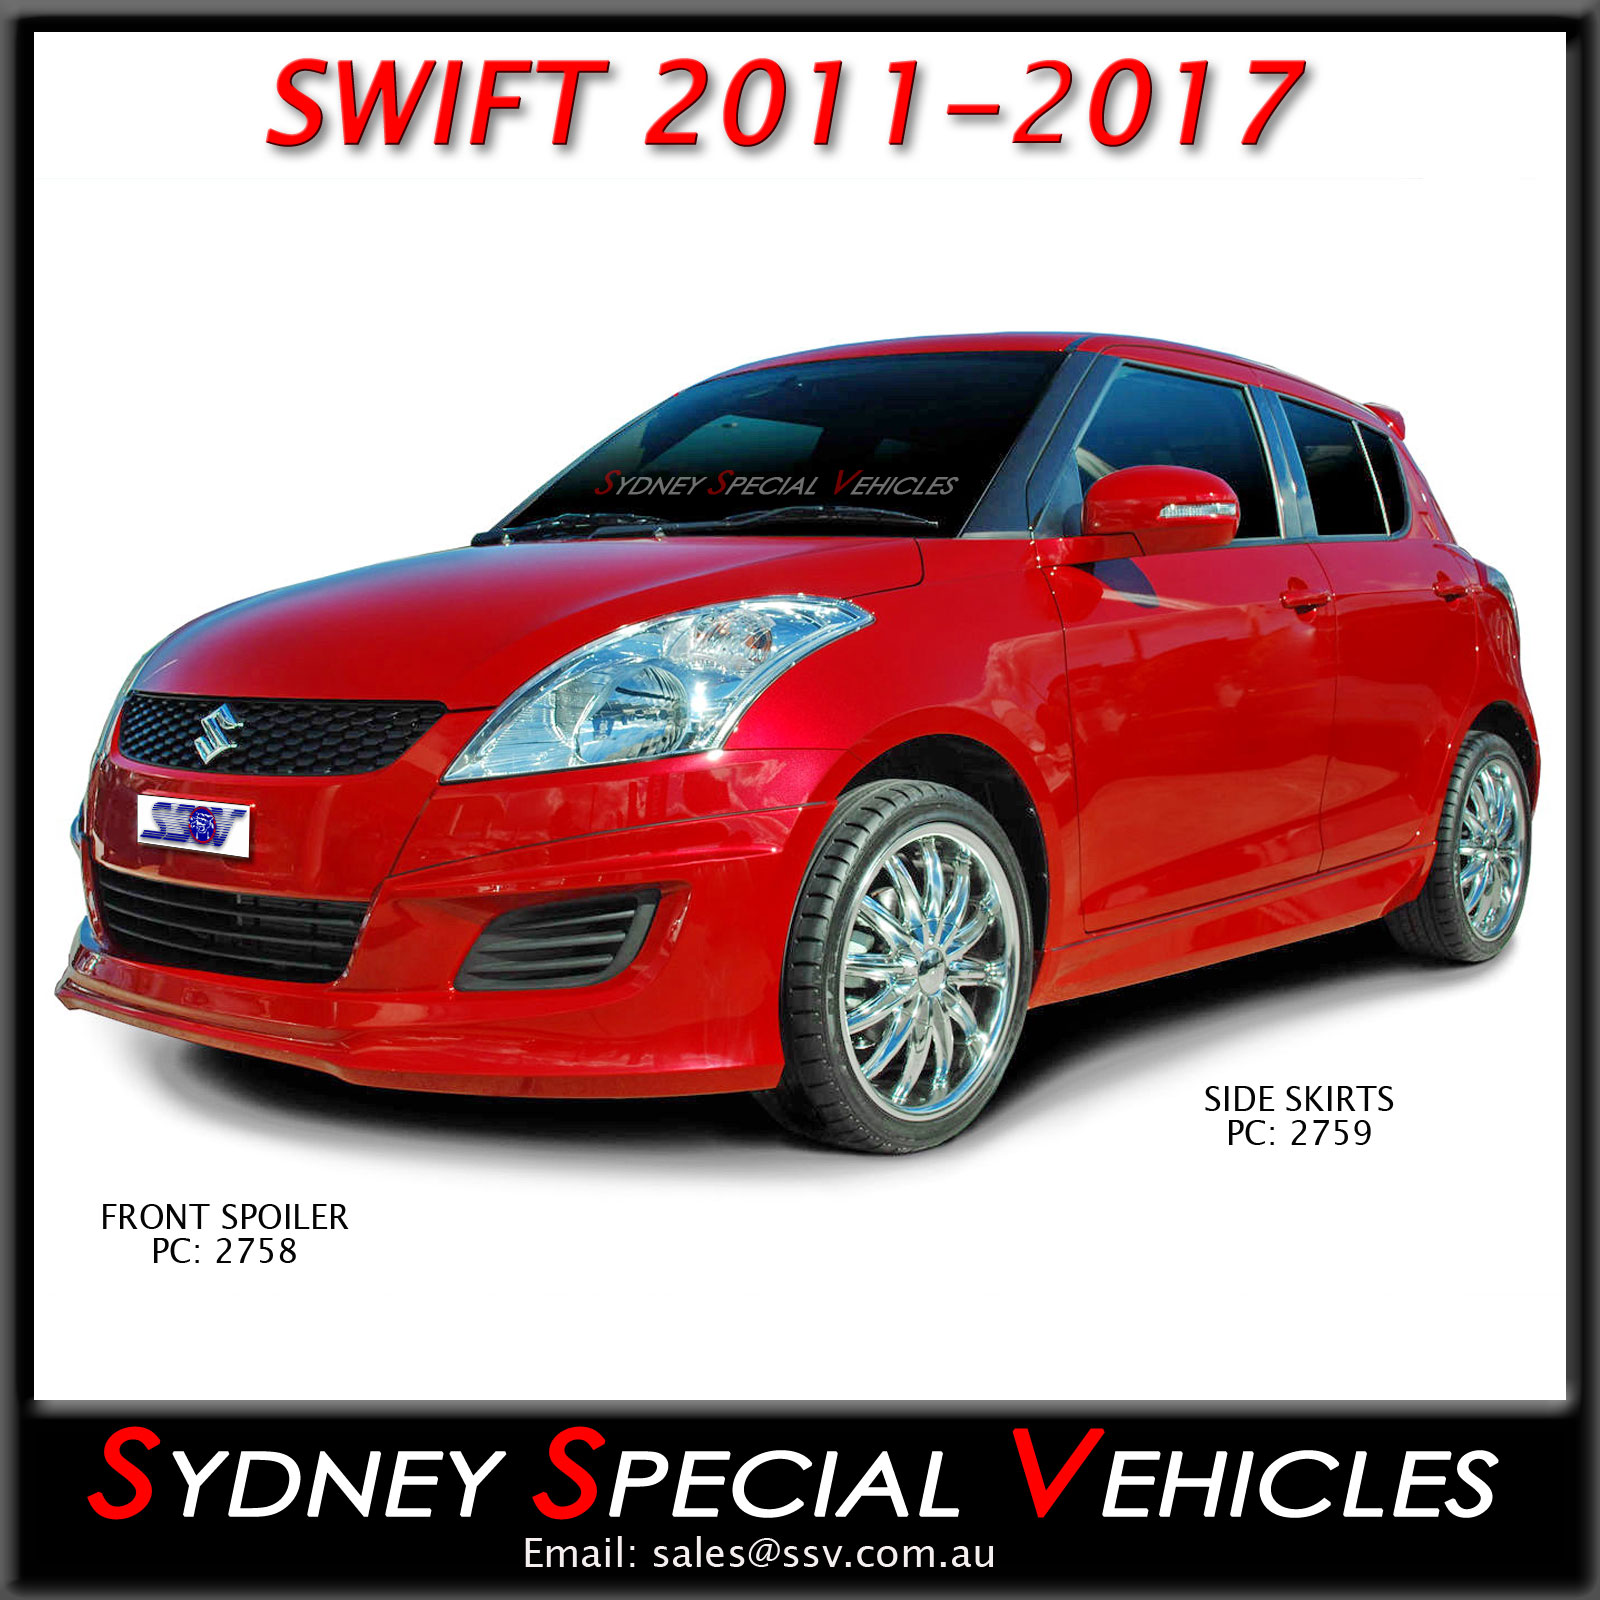 Download BODY KIT FOR SWIFT 2011-2017